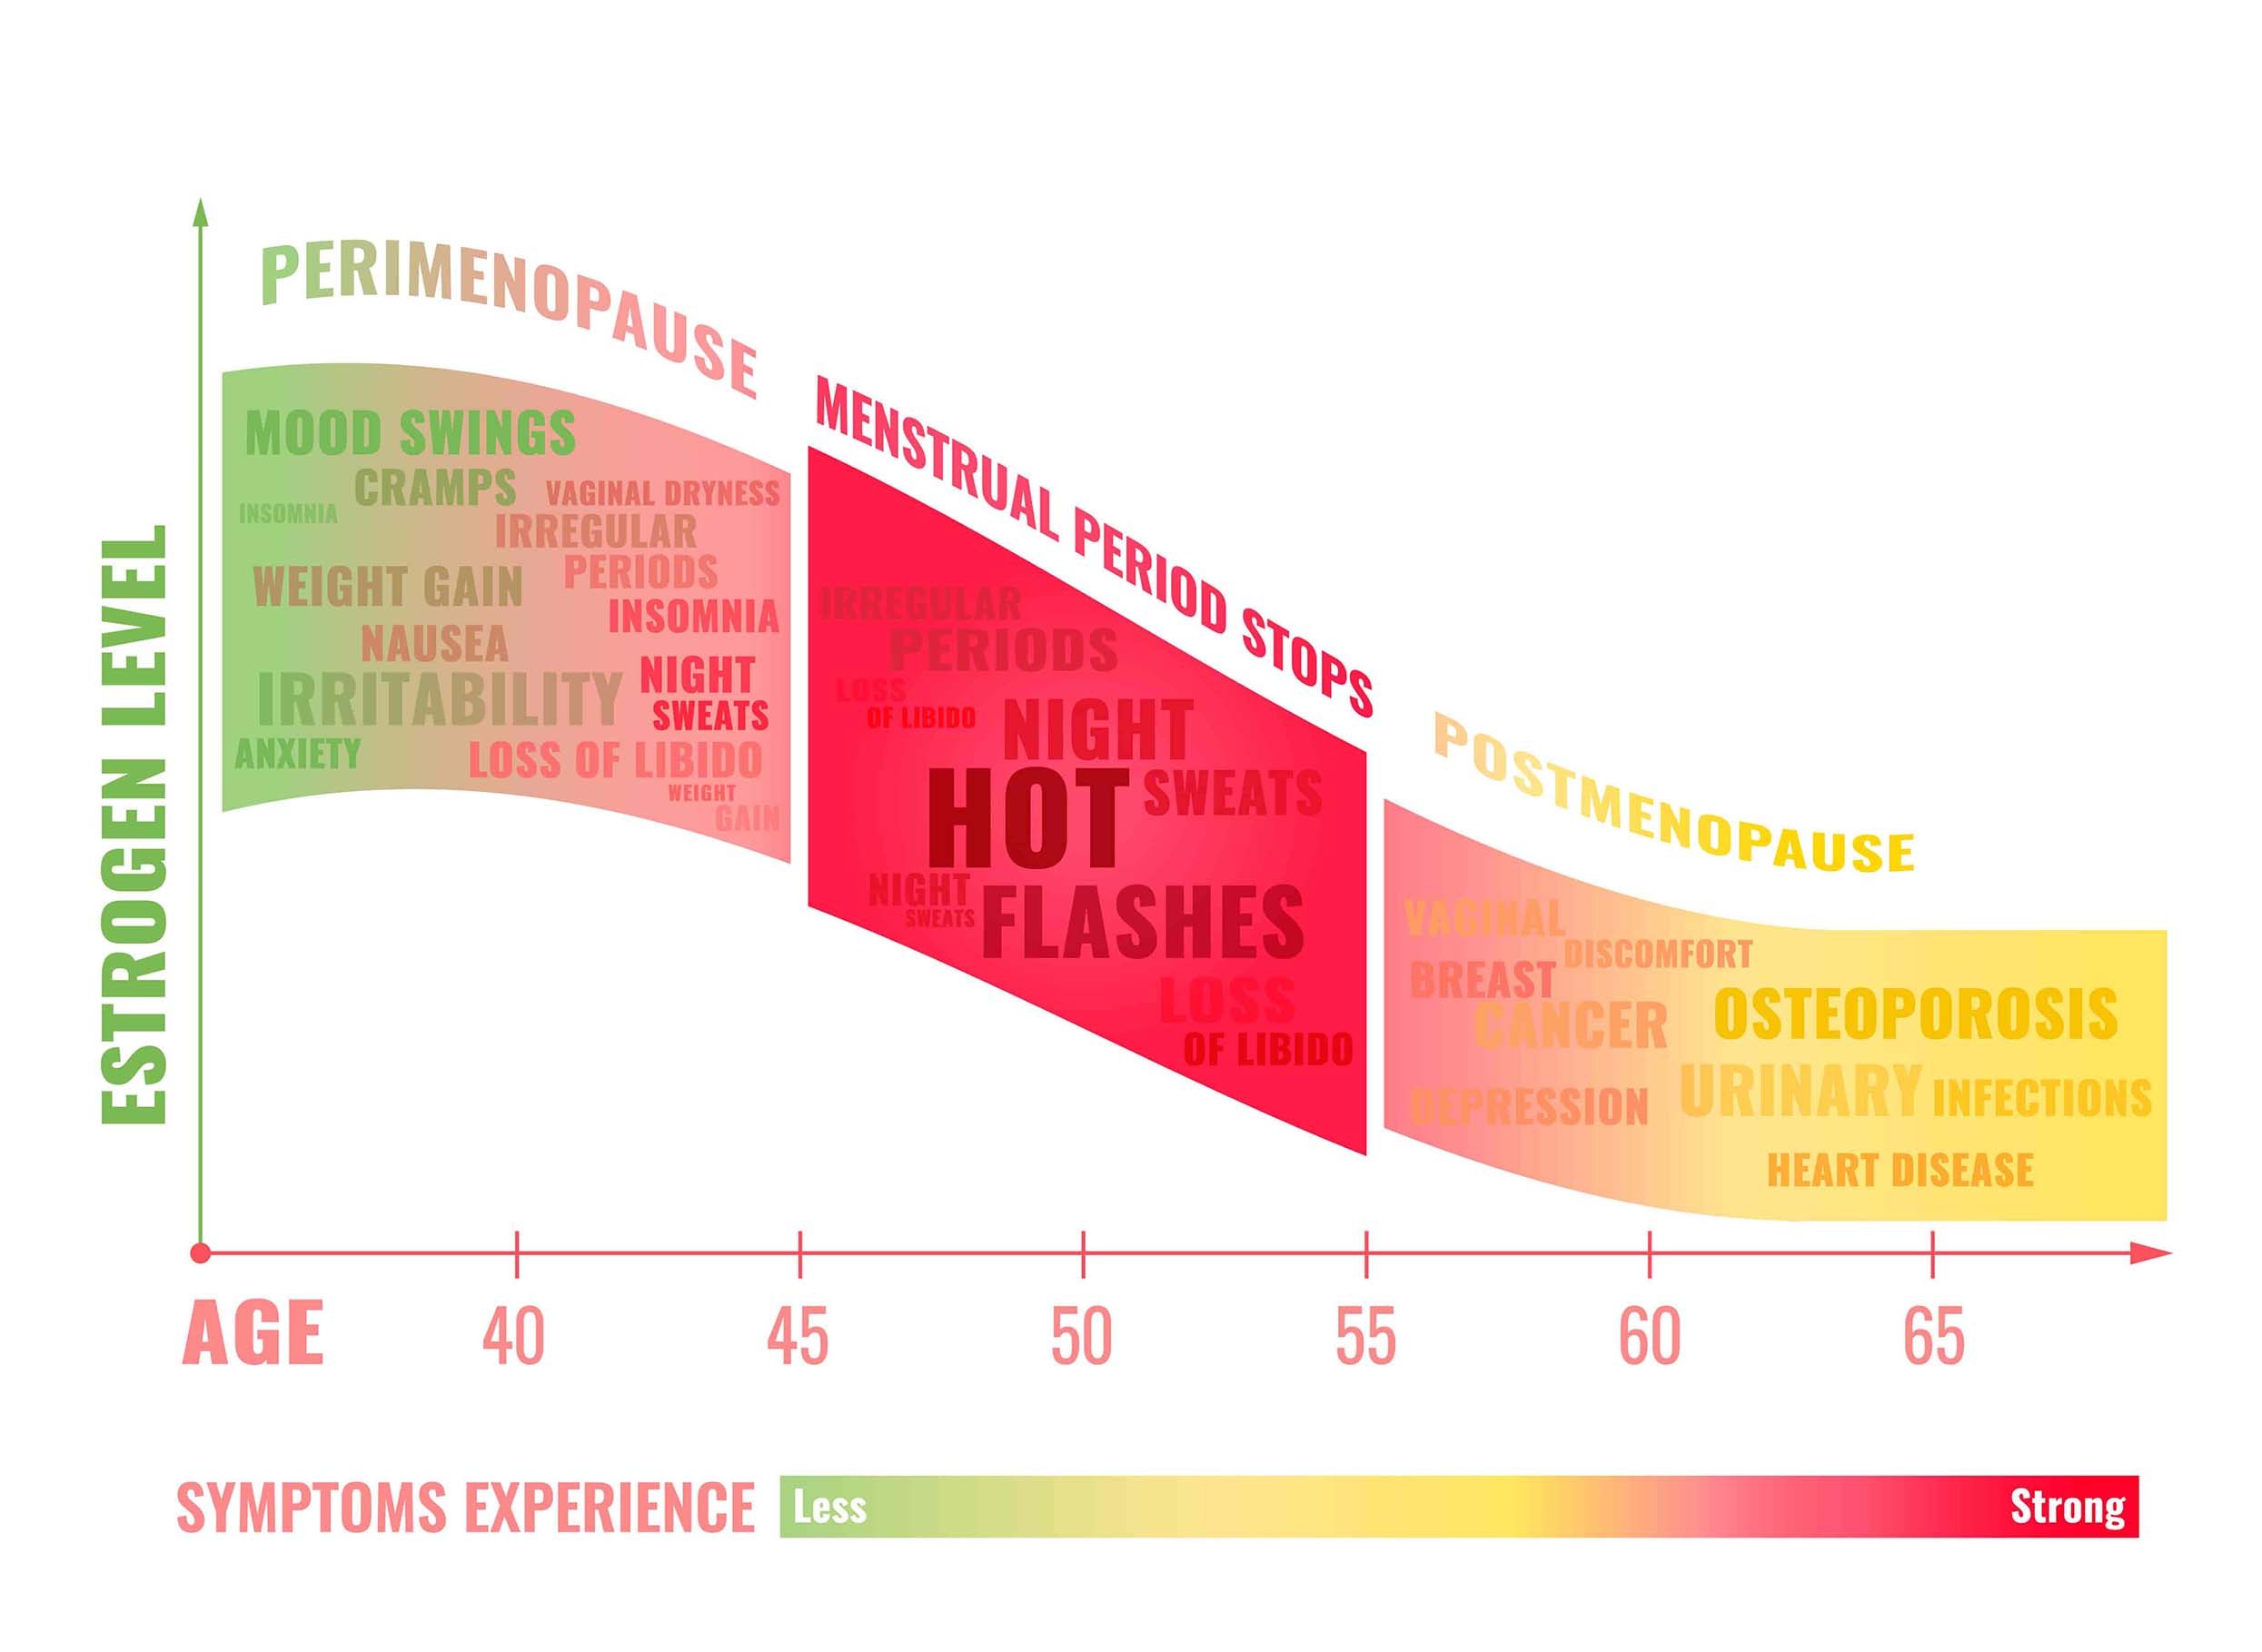 Menopause symptoms experience chart